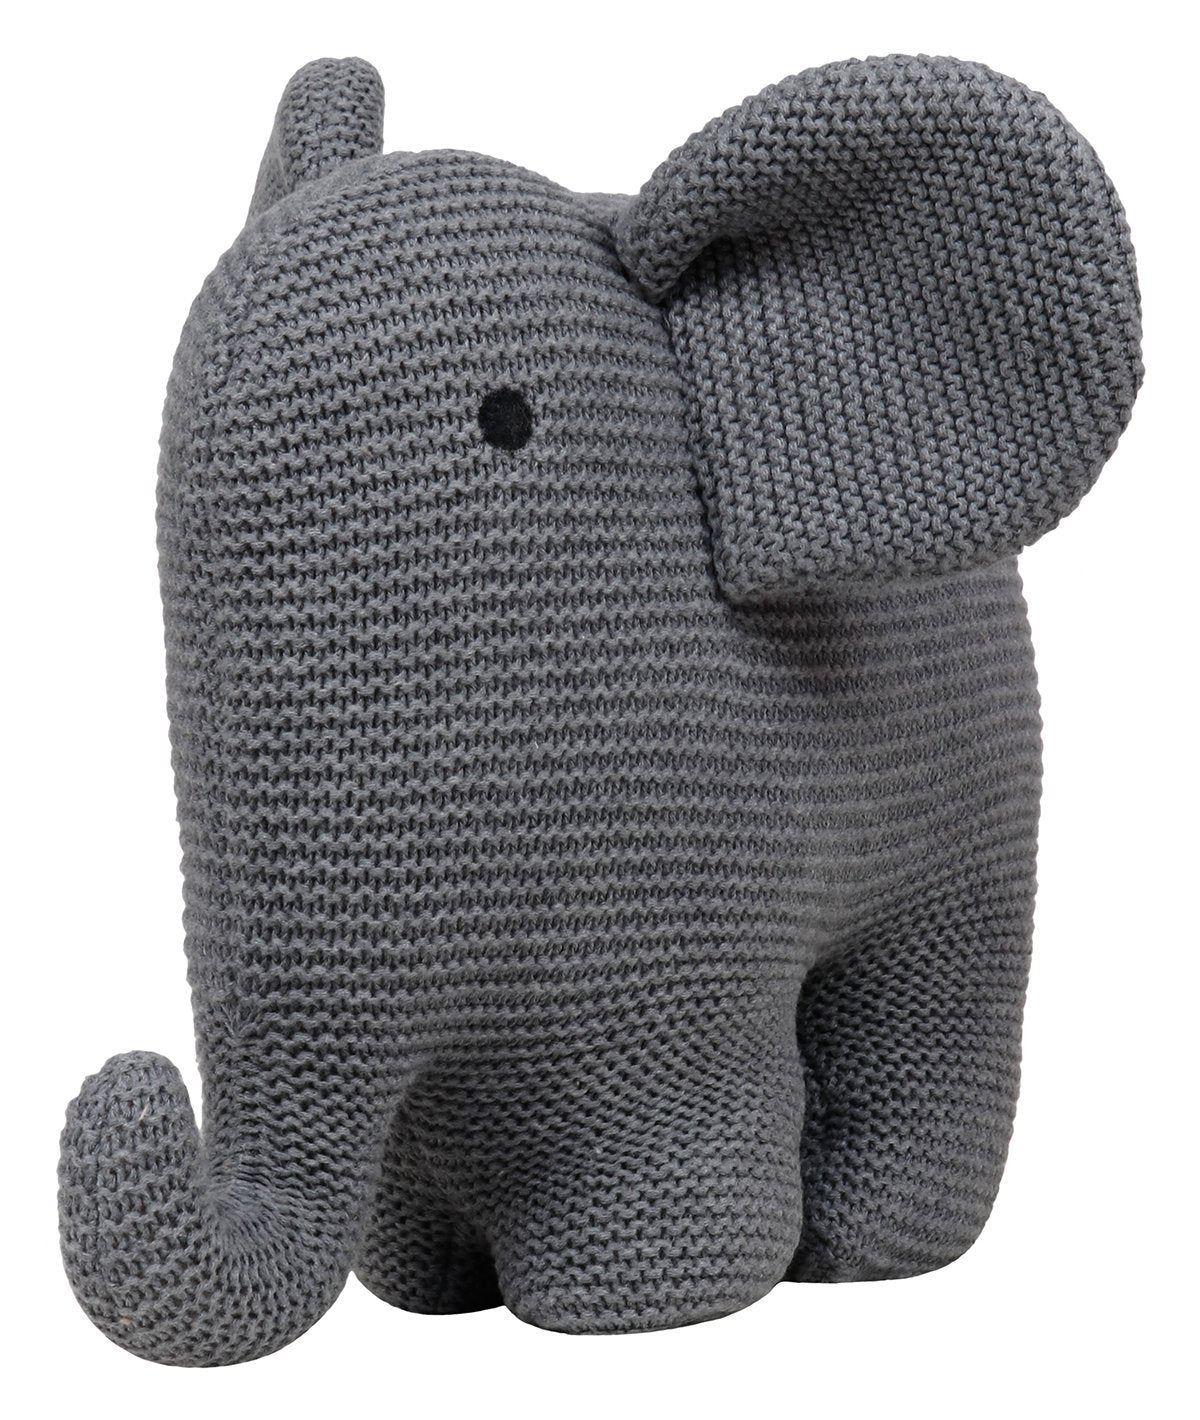 Elephant - Grey 100% Cotton Knitted Stuffed Soft Toy for Babies / Kids